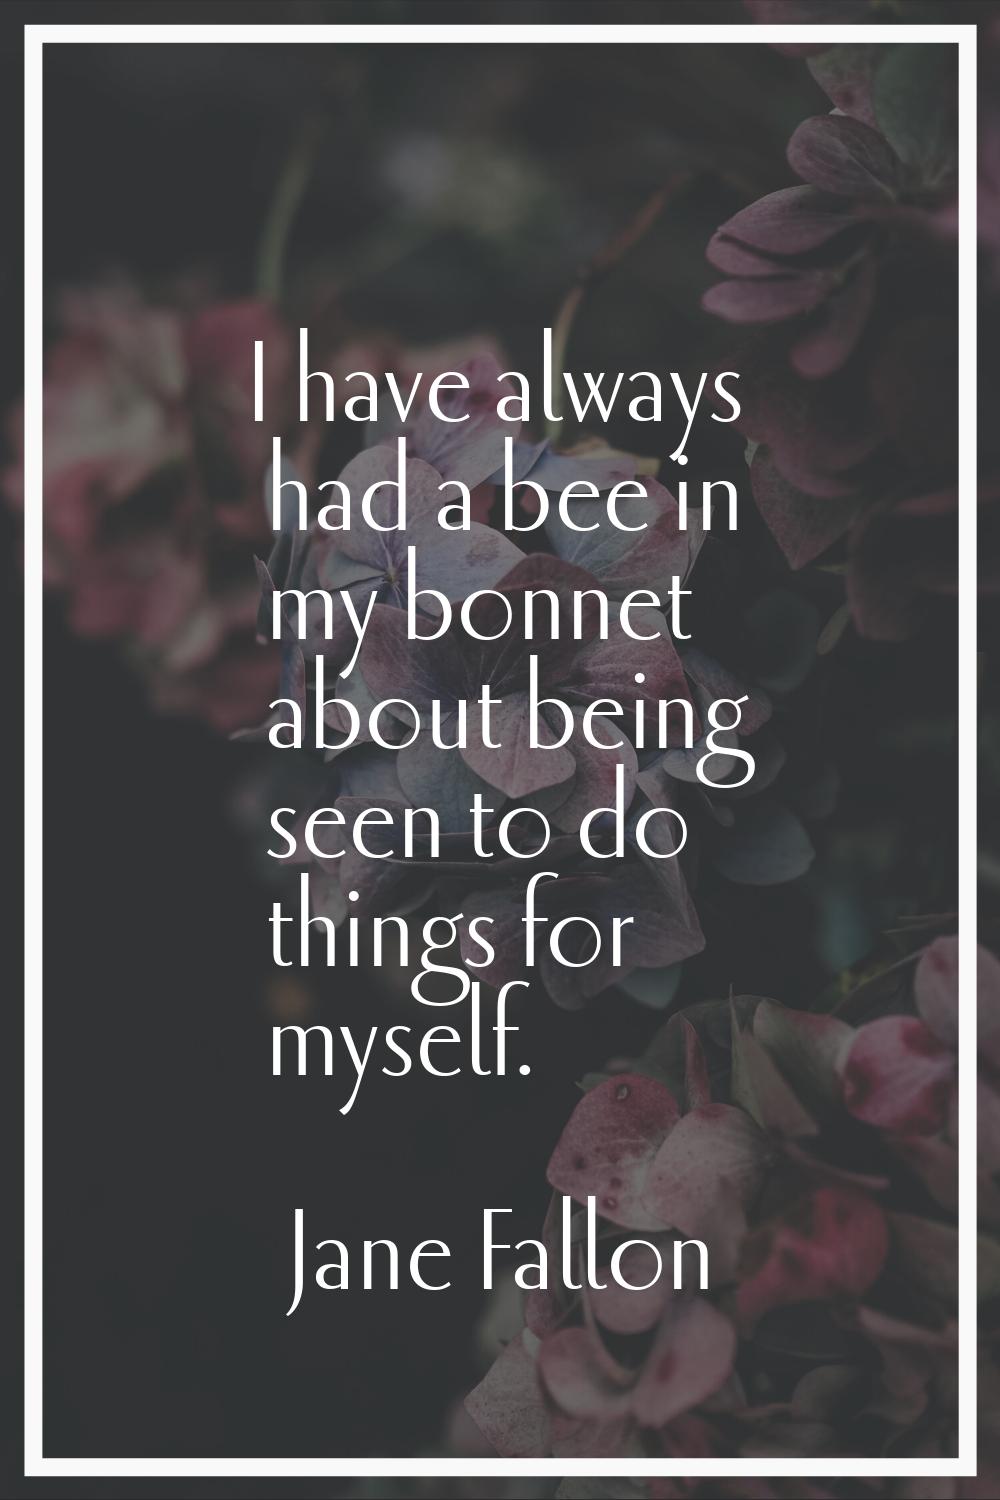 I have always had a bee in my bonnet about being seen to do things for myself.